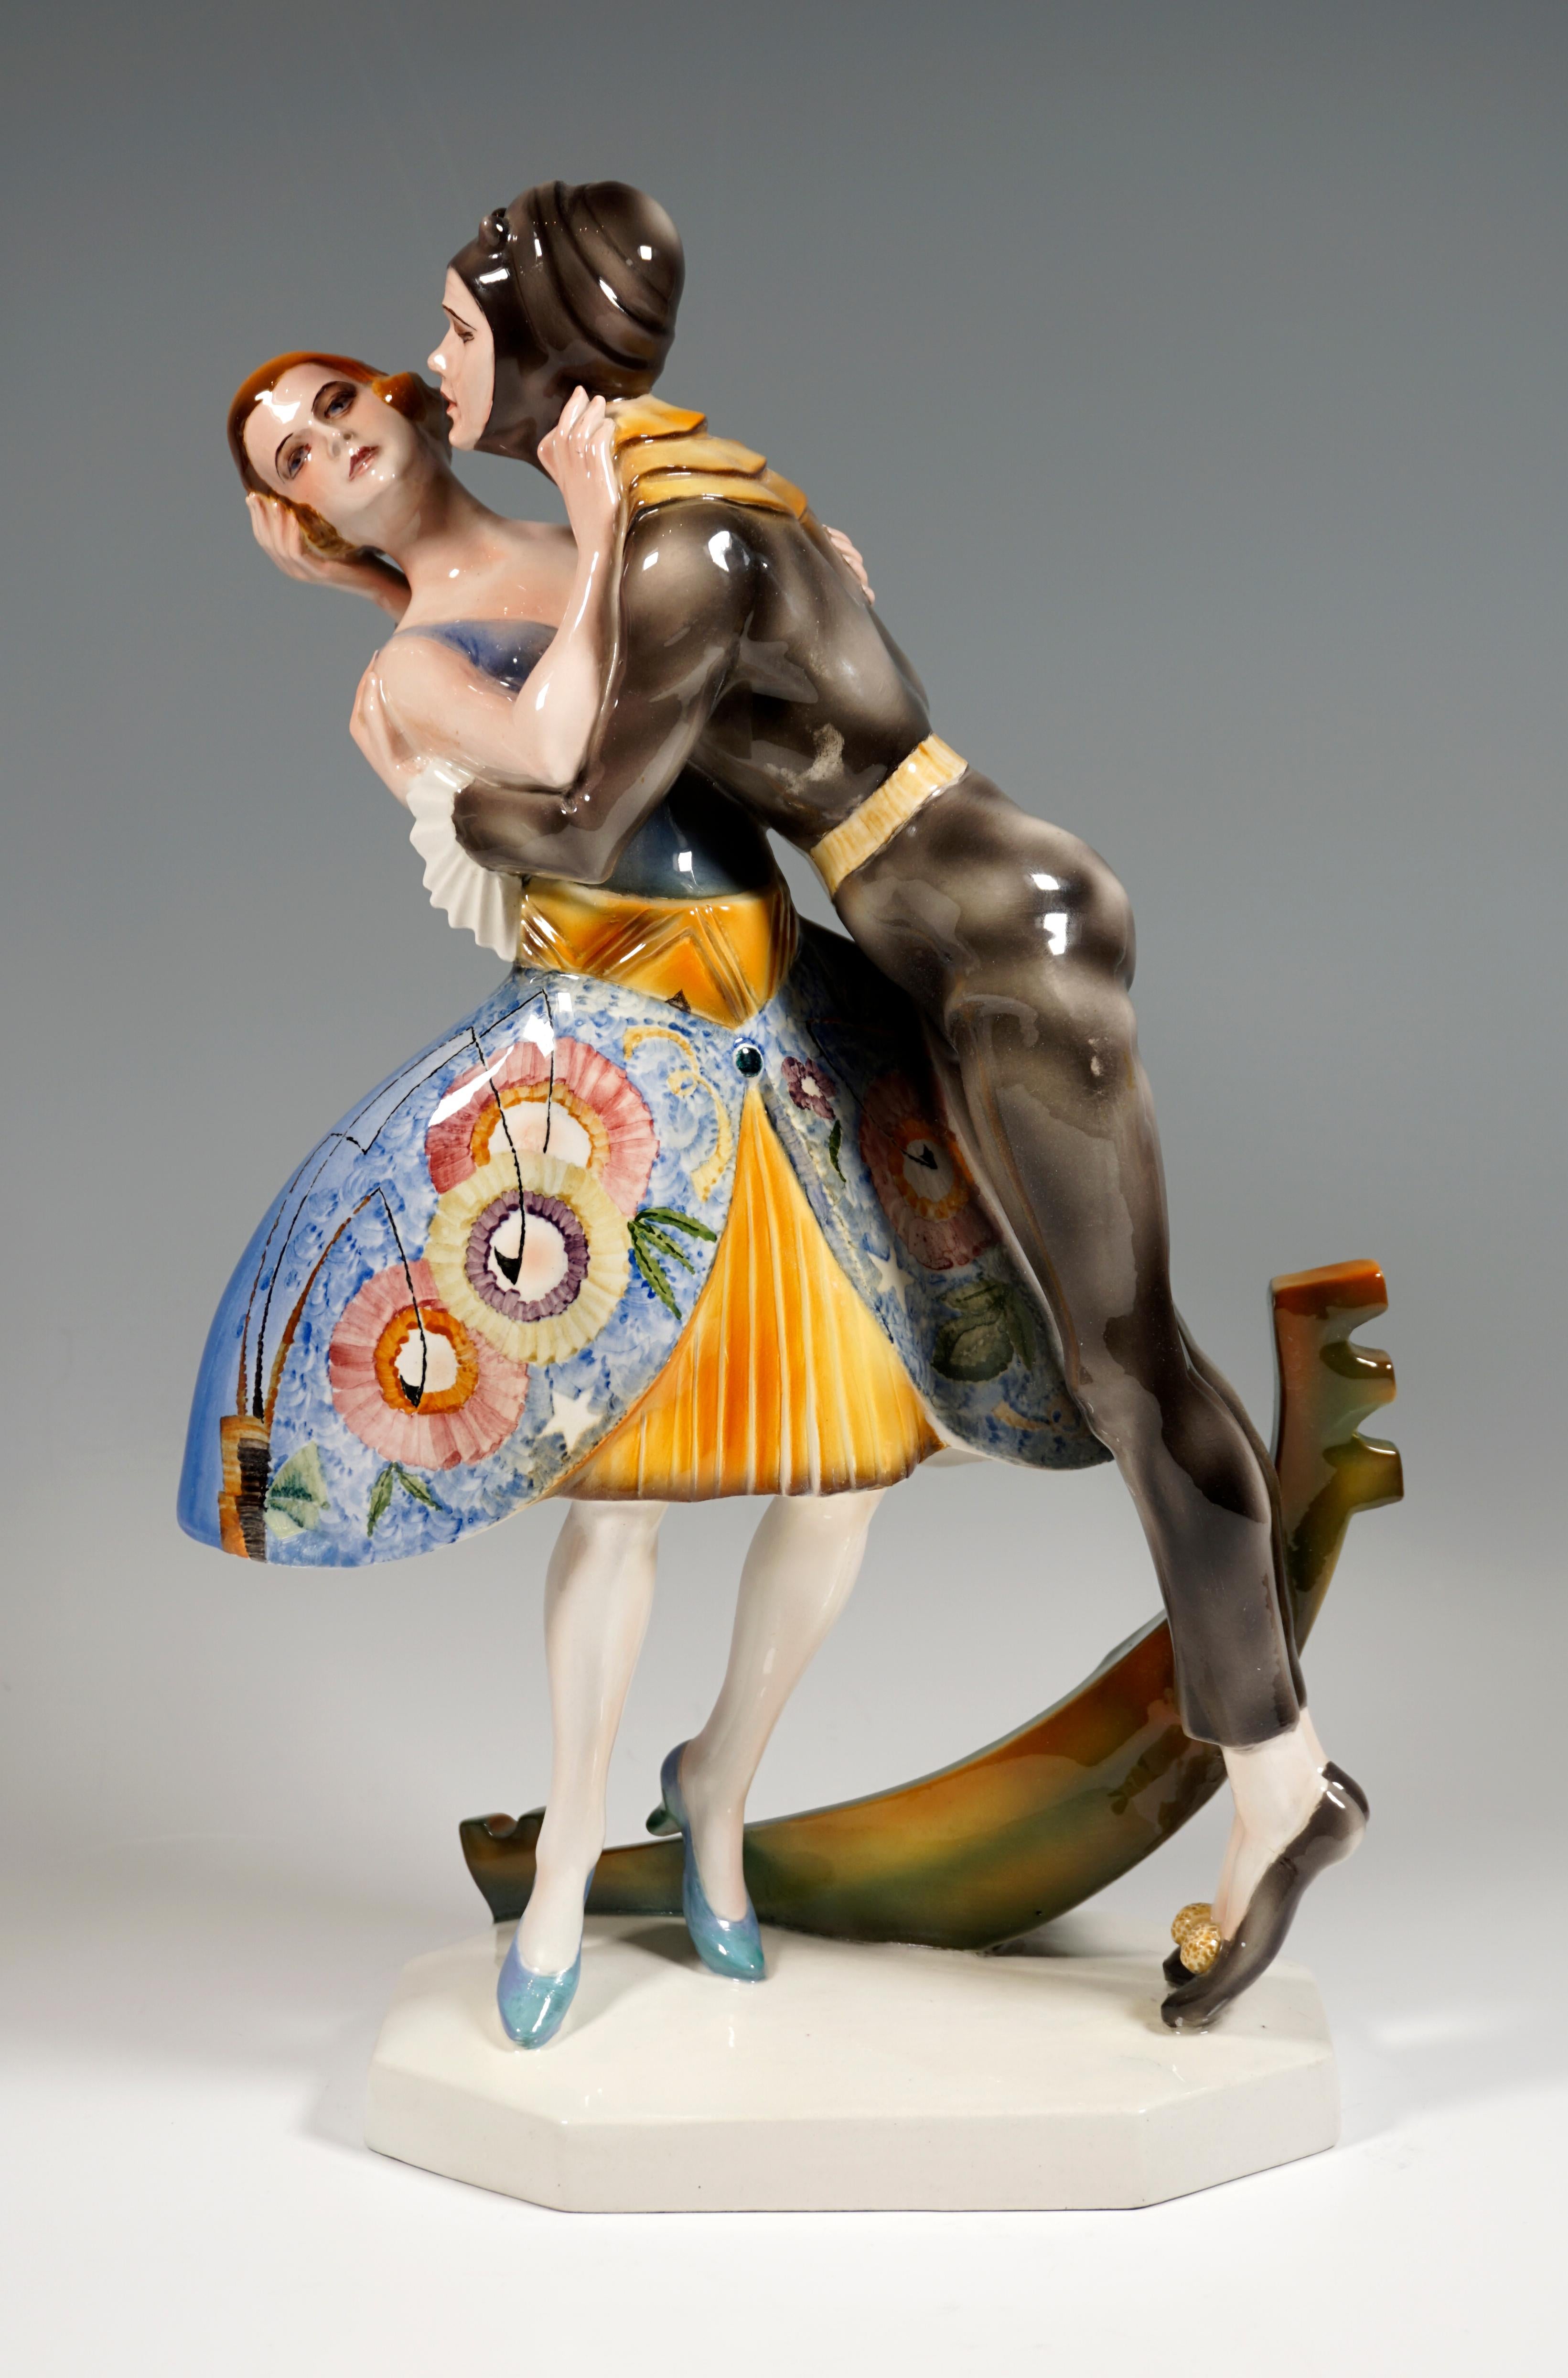 Rare Marcell Goldscheider ceramic figurine group.
Standing, embracing, disguised lovers: the galan in a tight, dark gray suit with a yellow collar and hood with antennae bends over to his beloved in a blue and yellow costume with an insect